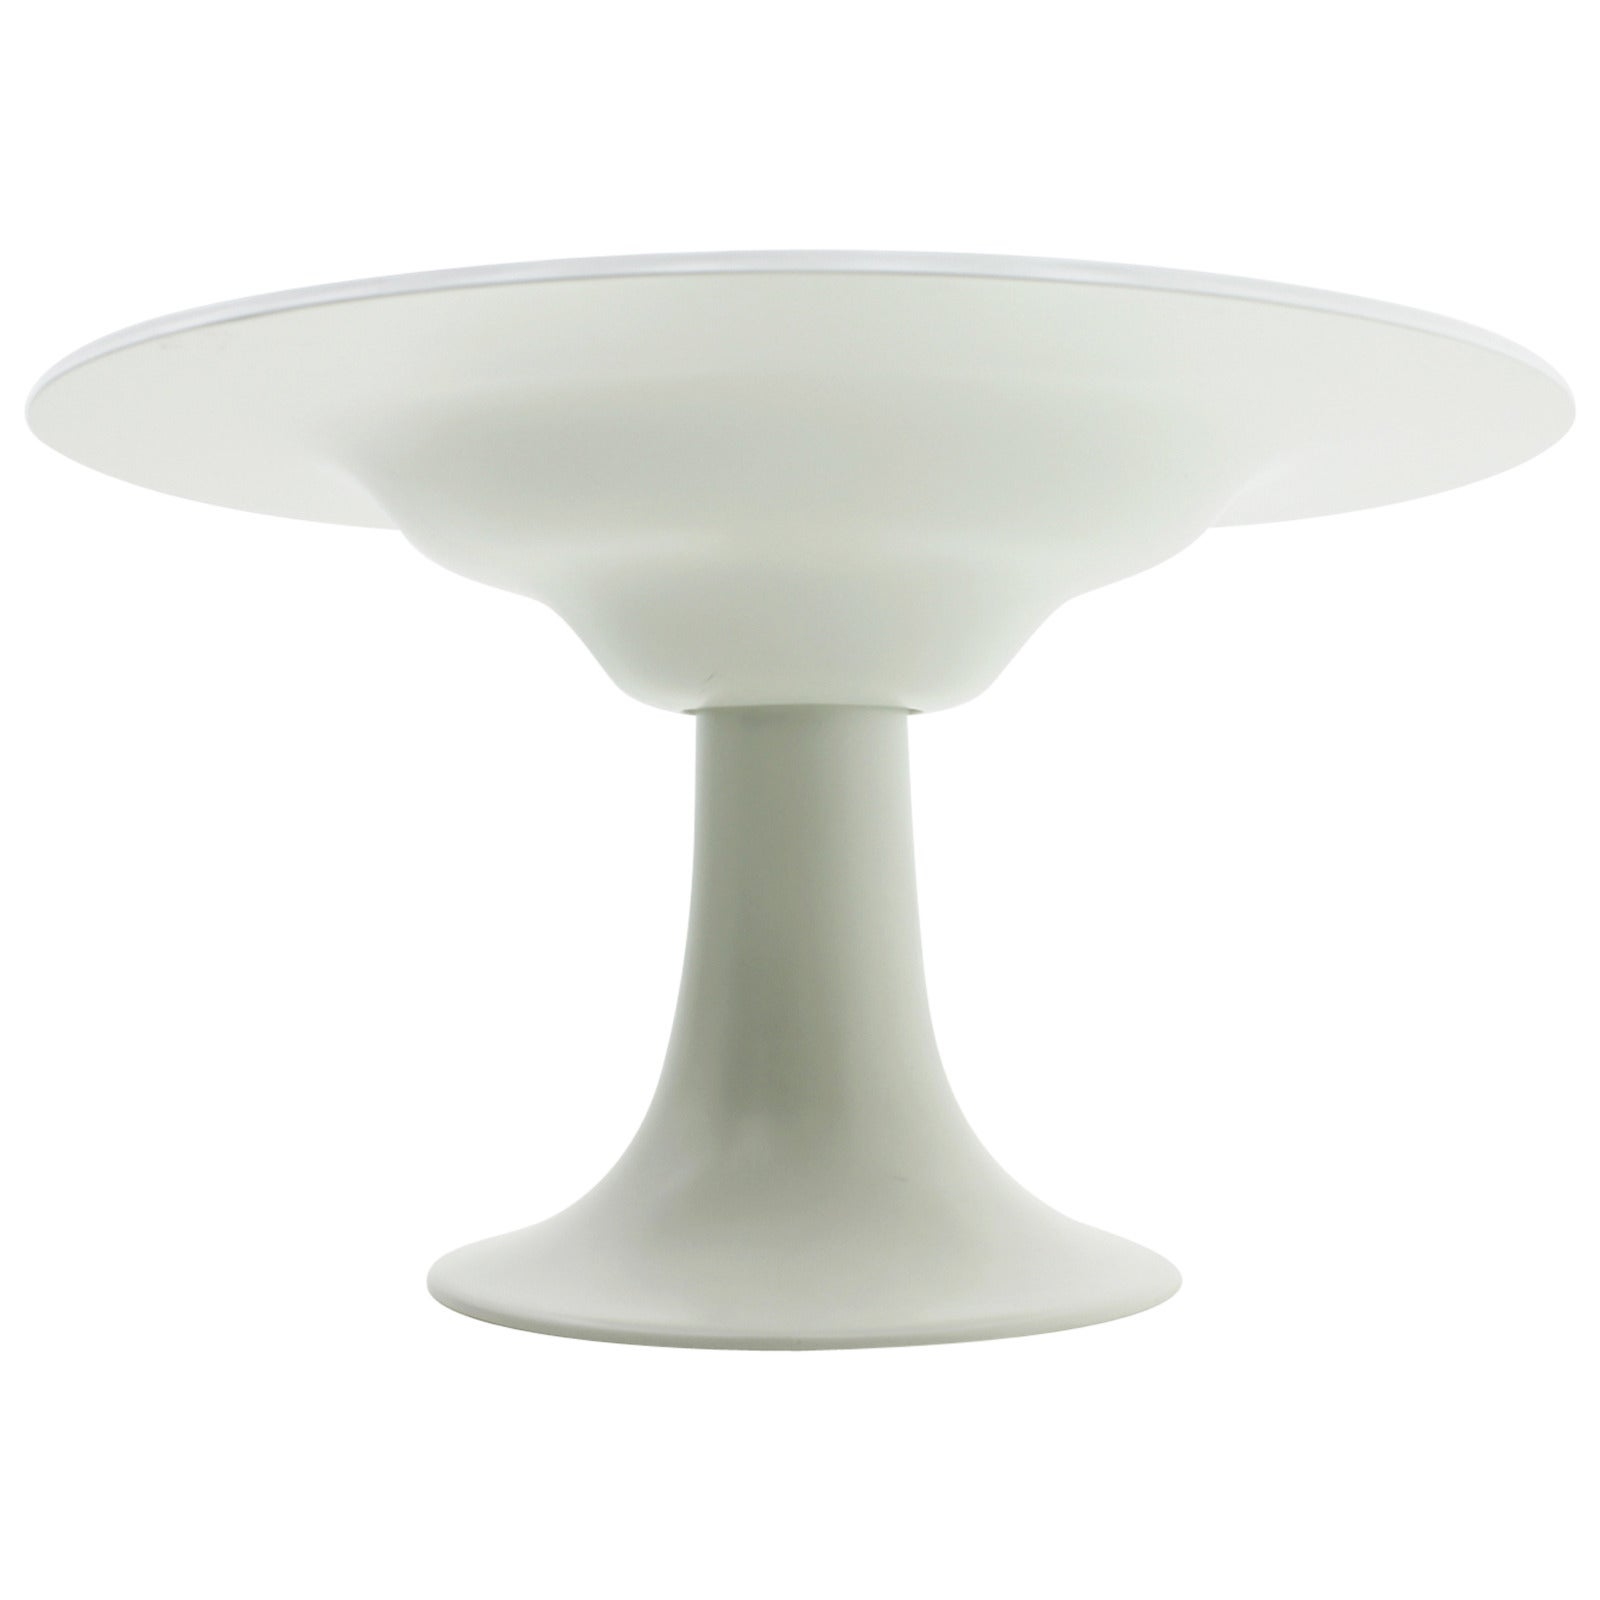 Otto Zapf Table Dining Table Column, Germany, 1967 For Sale